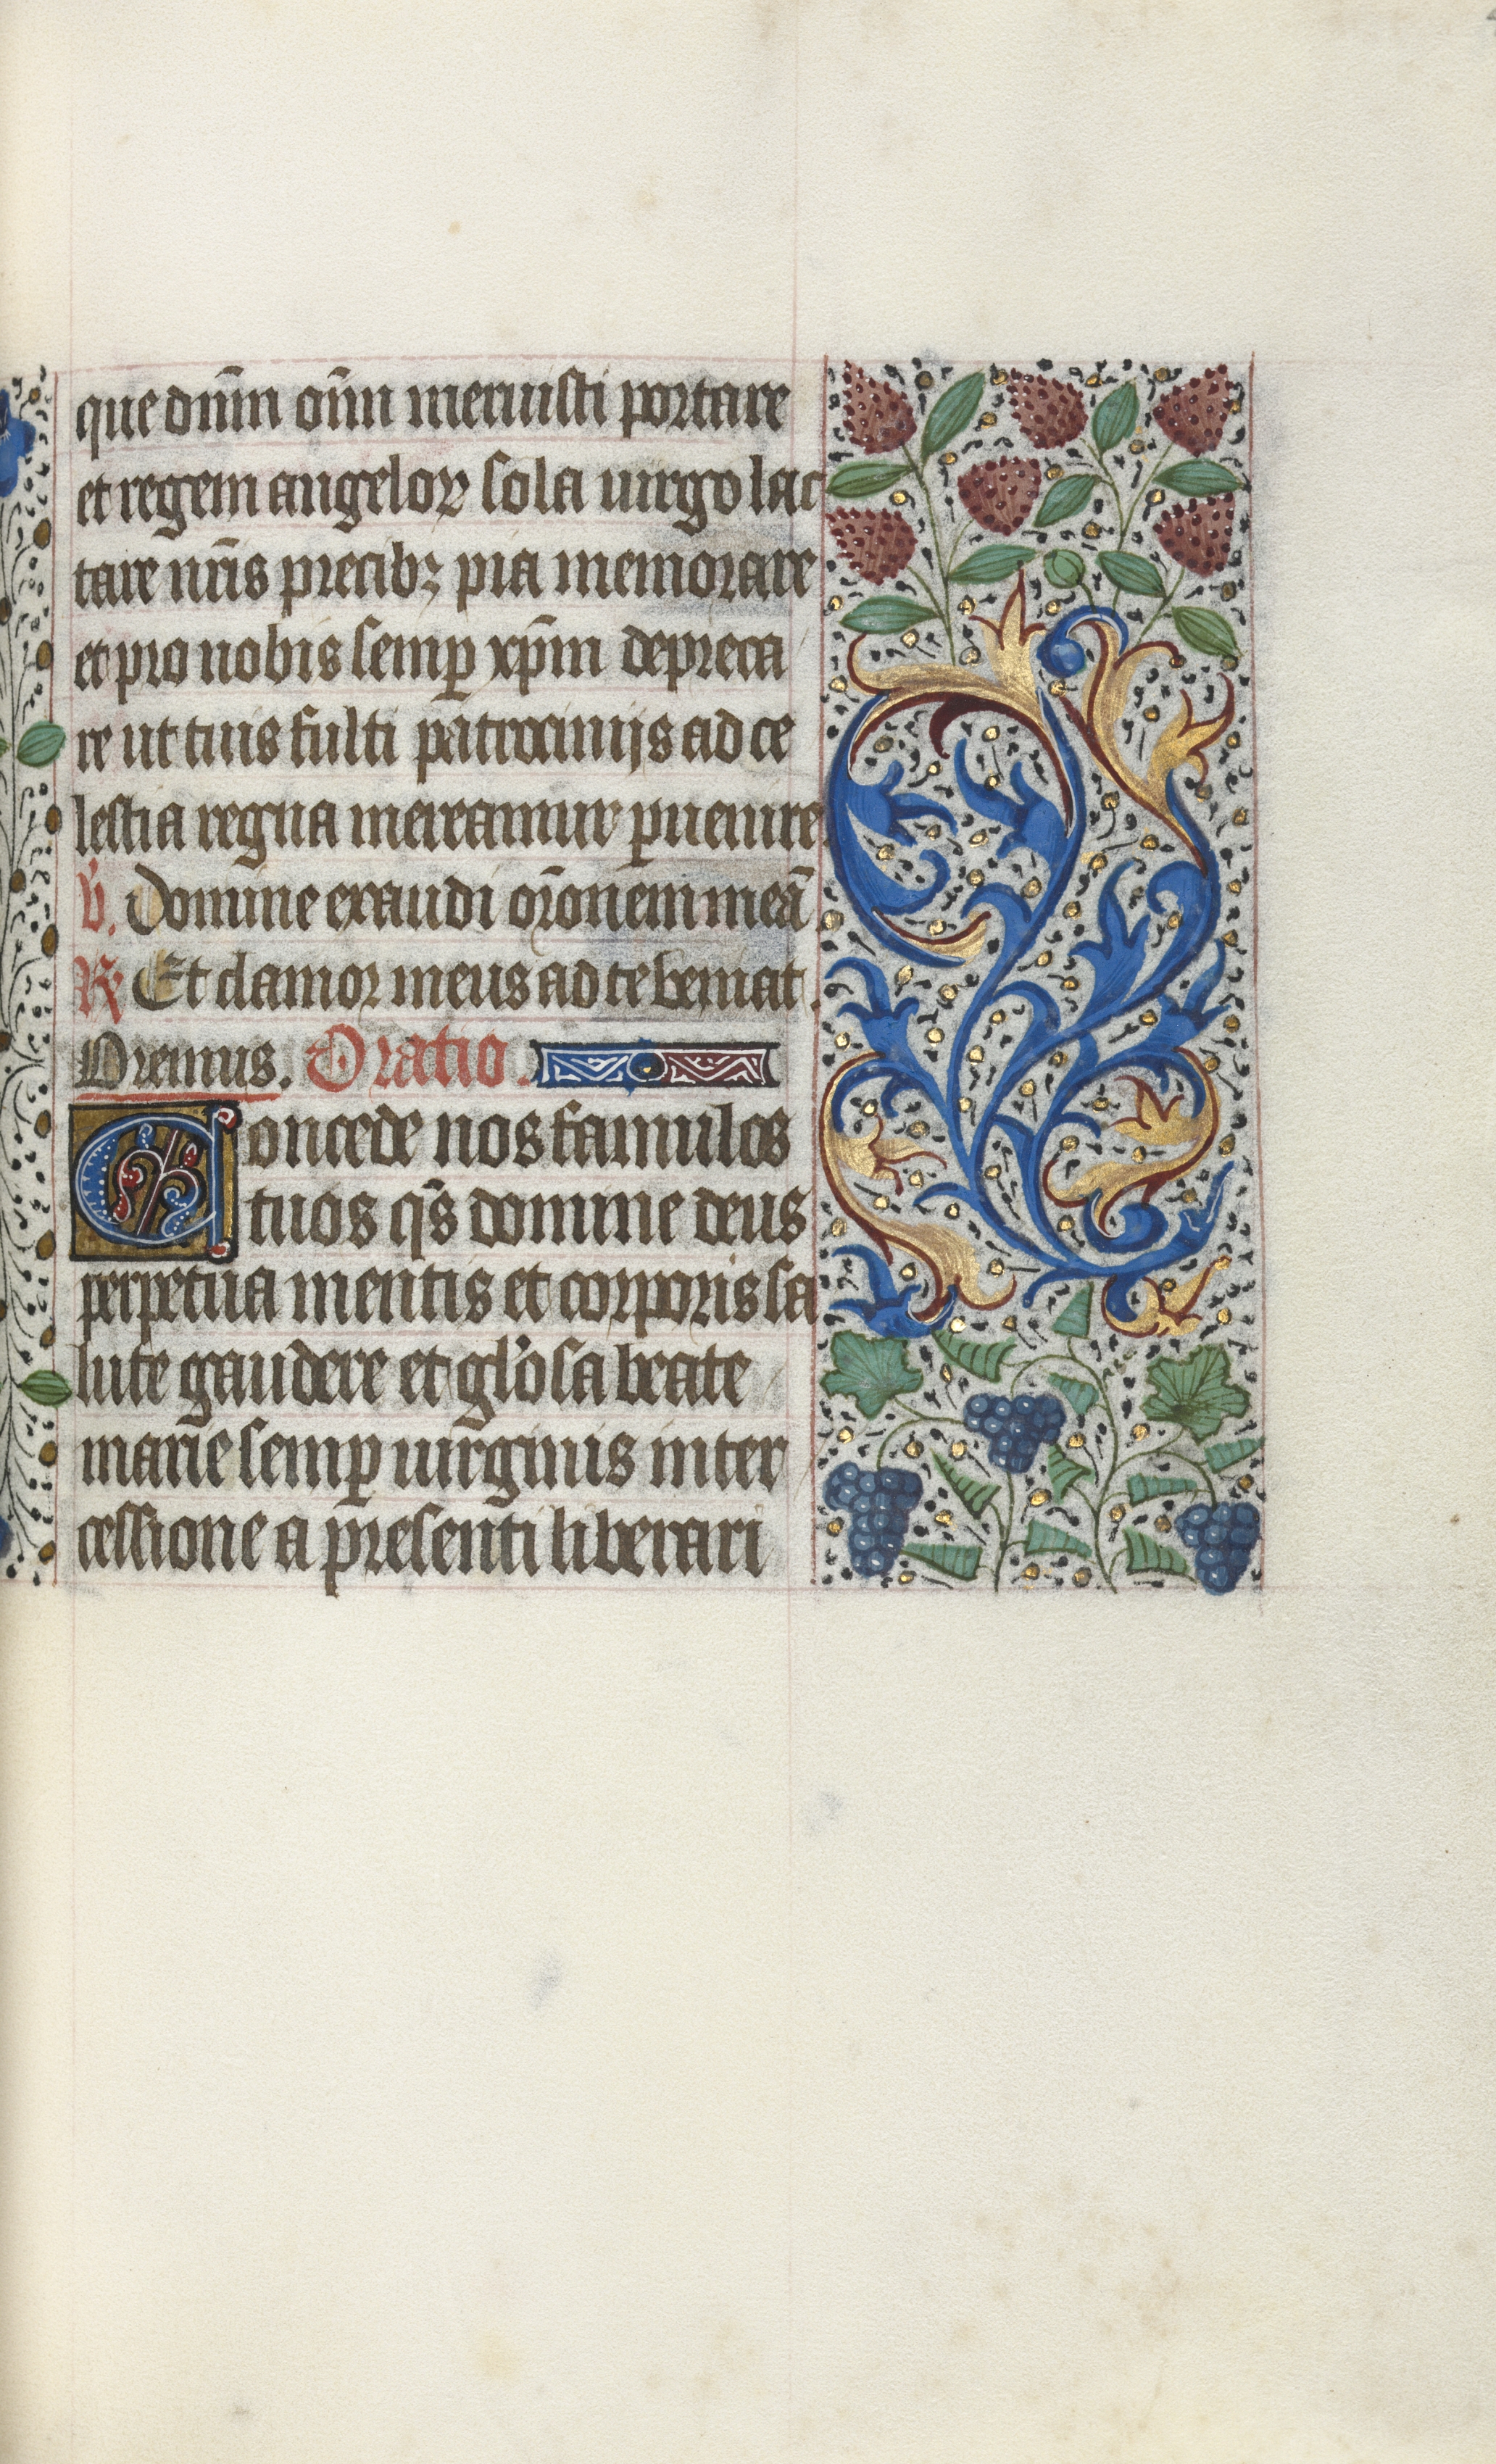 Book of Hours (Use of Rouen): fol. 49r